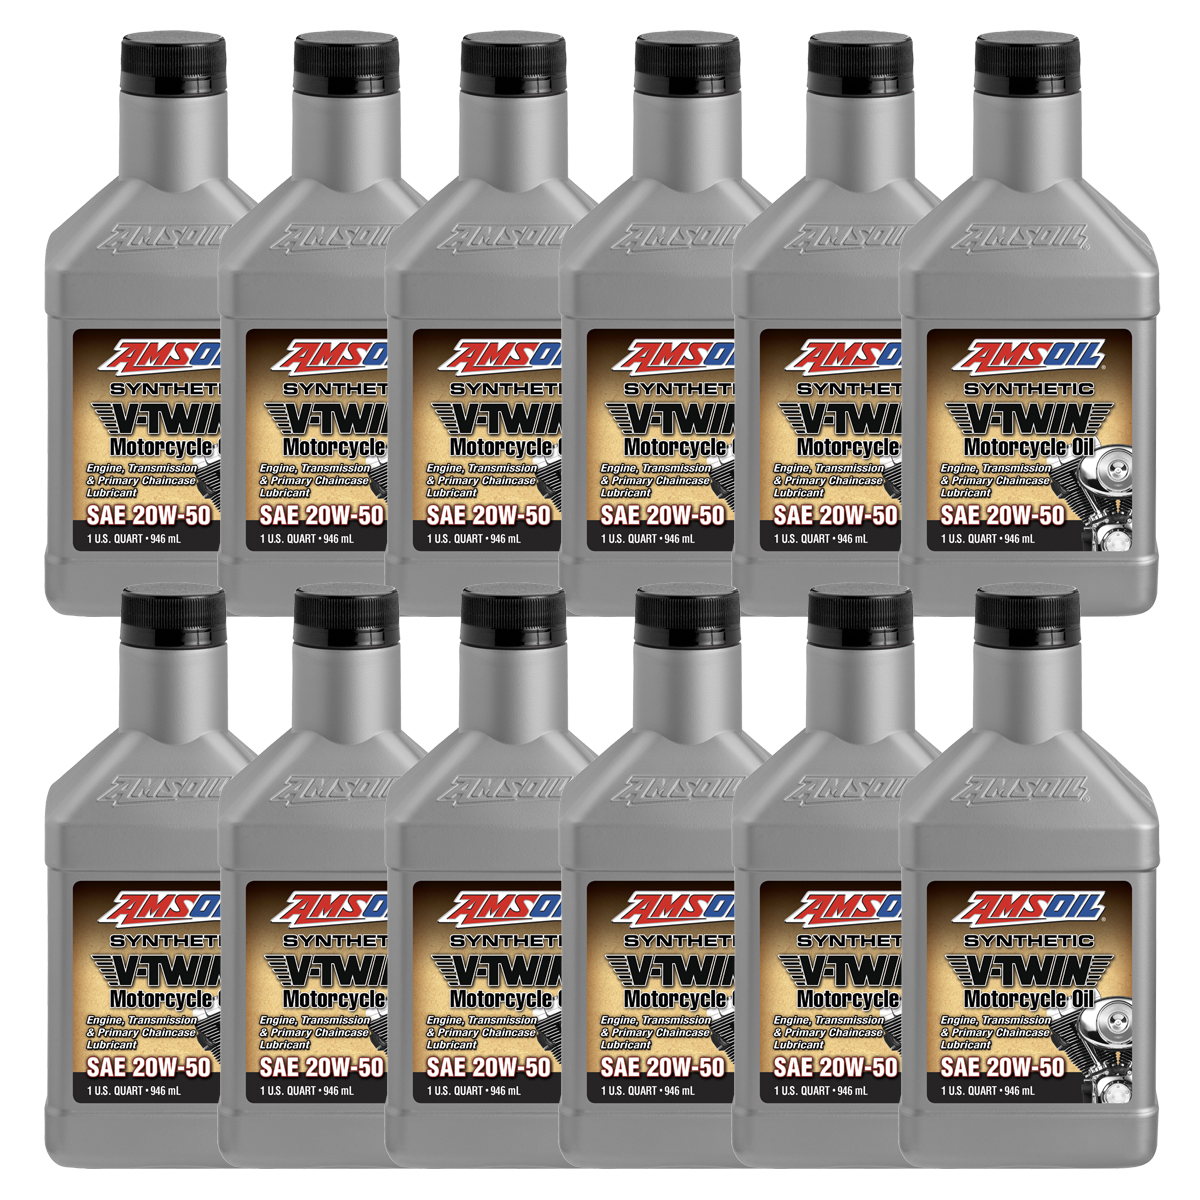 Amsoil 20W-50 motorcycle oil case of 12 quarts